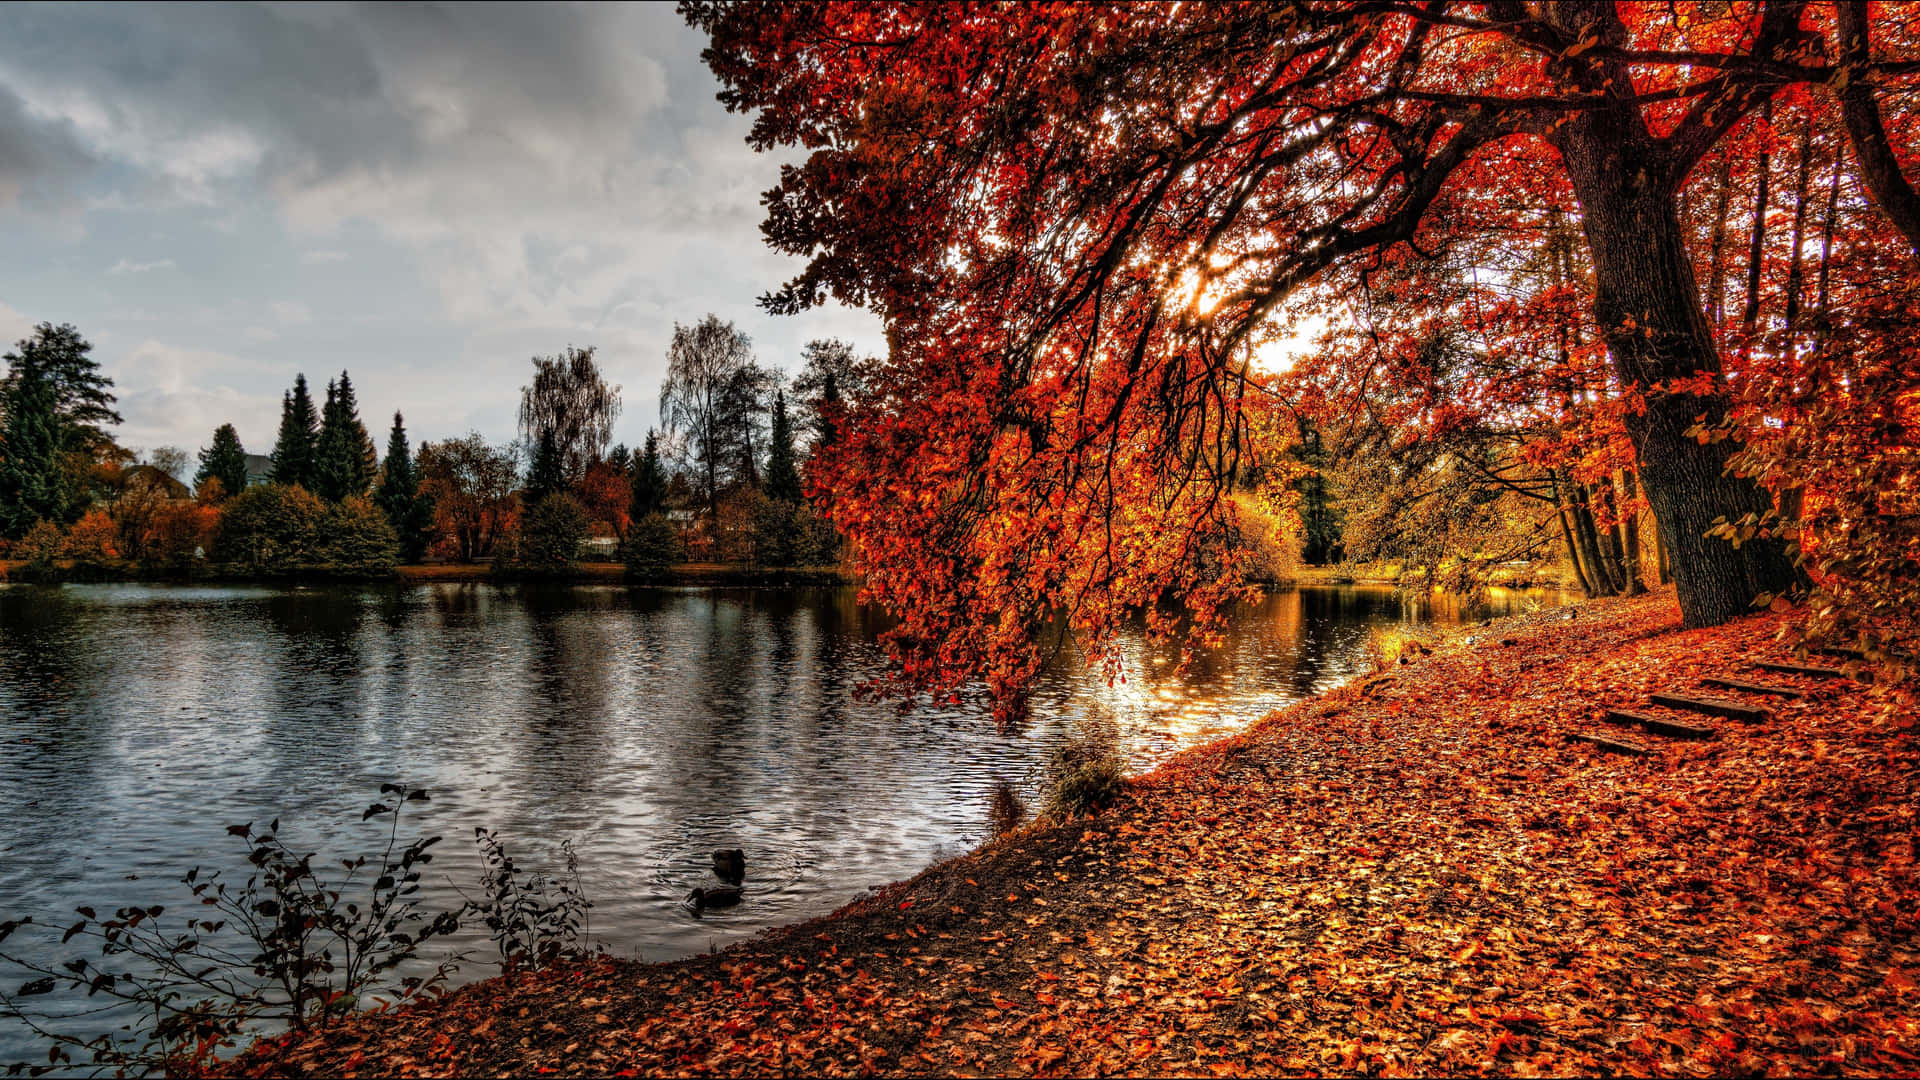 Feel the air of fall with this stunning 4K Autumn wallpaper Wallpaper